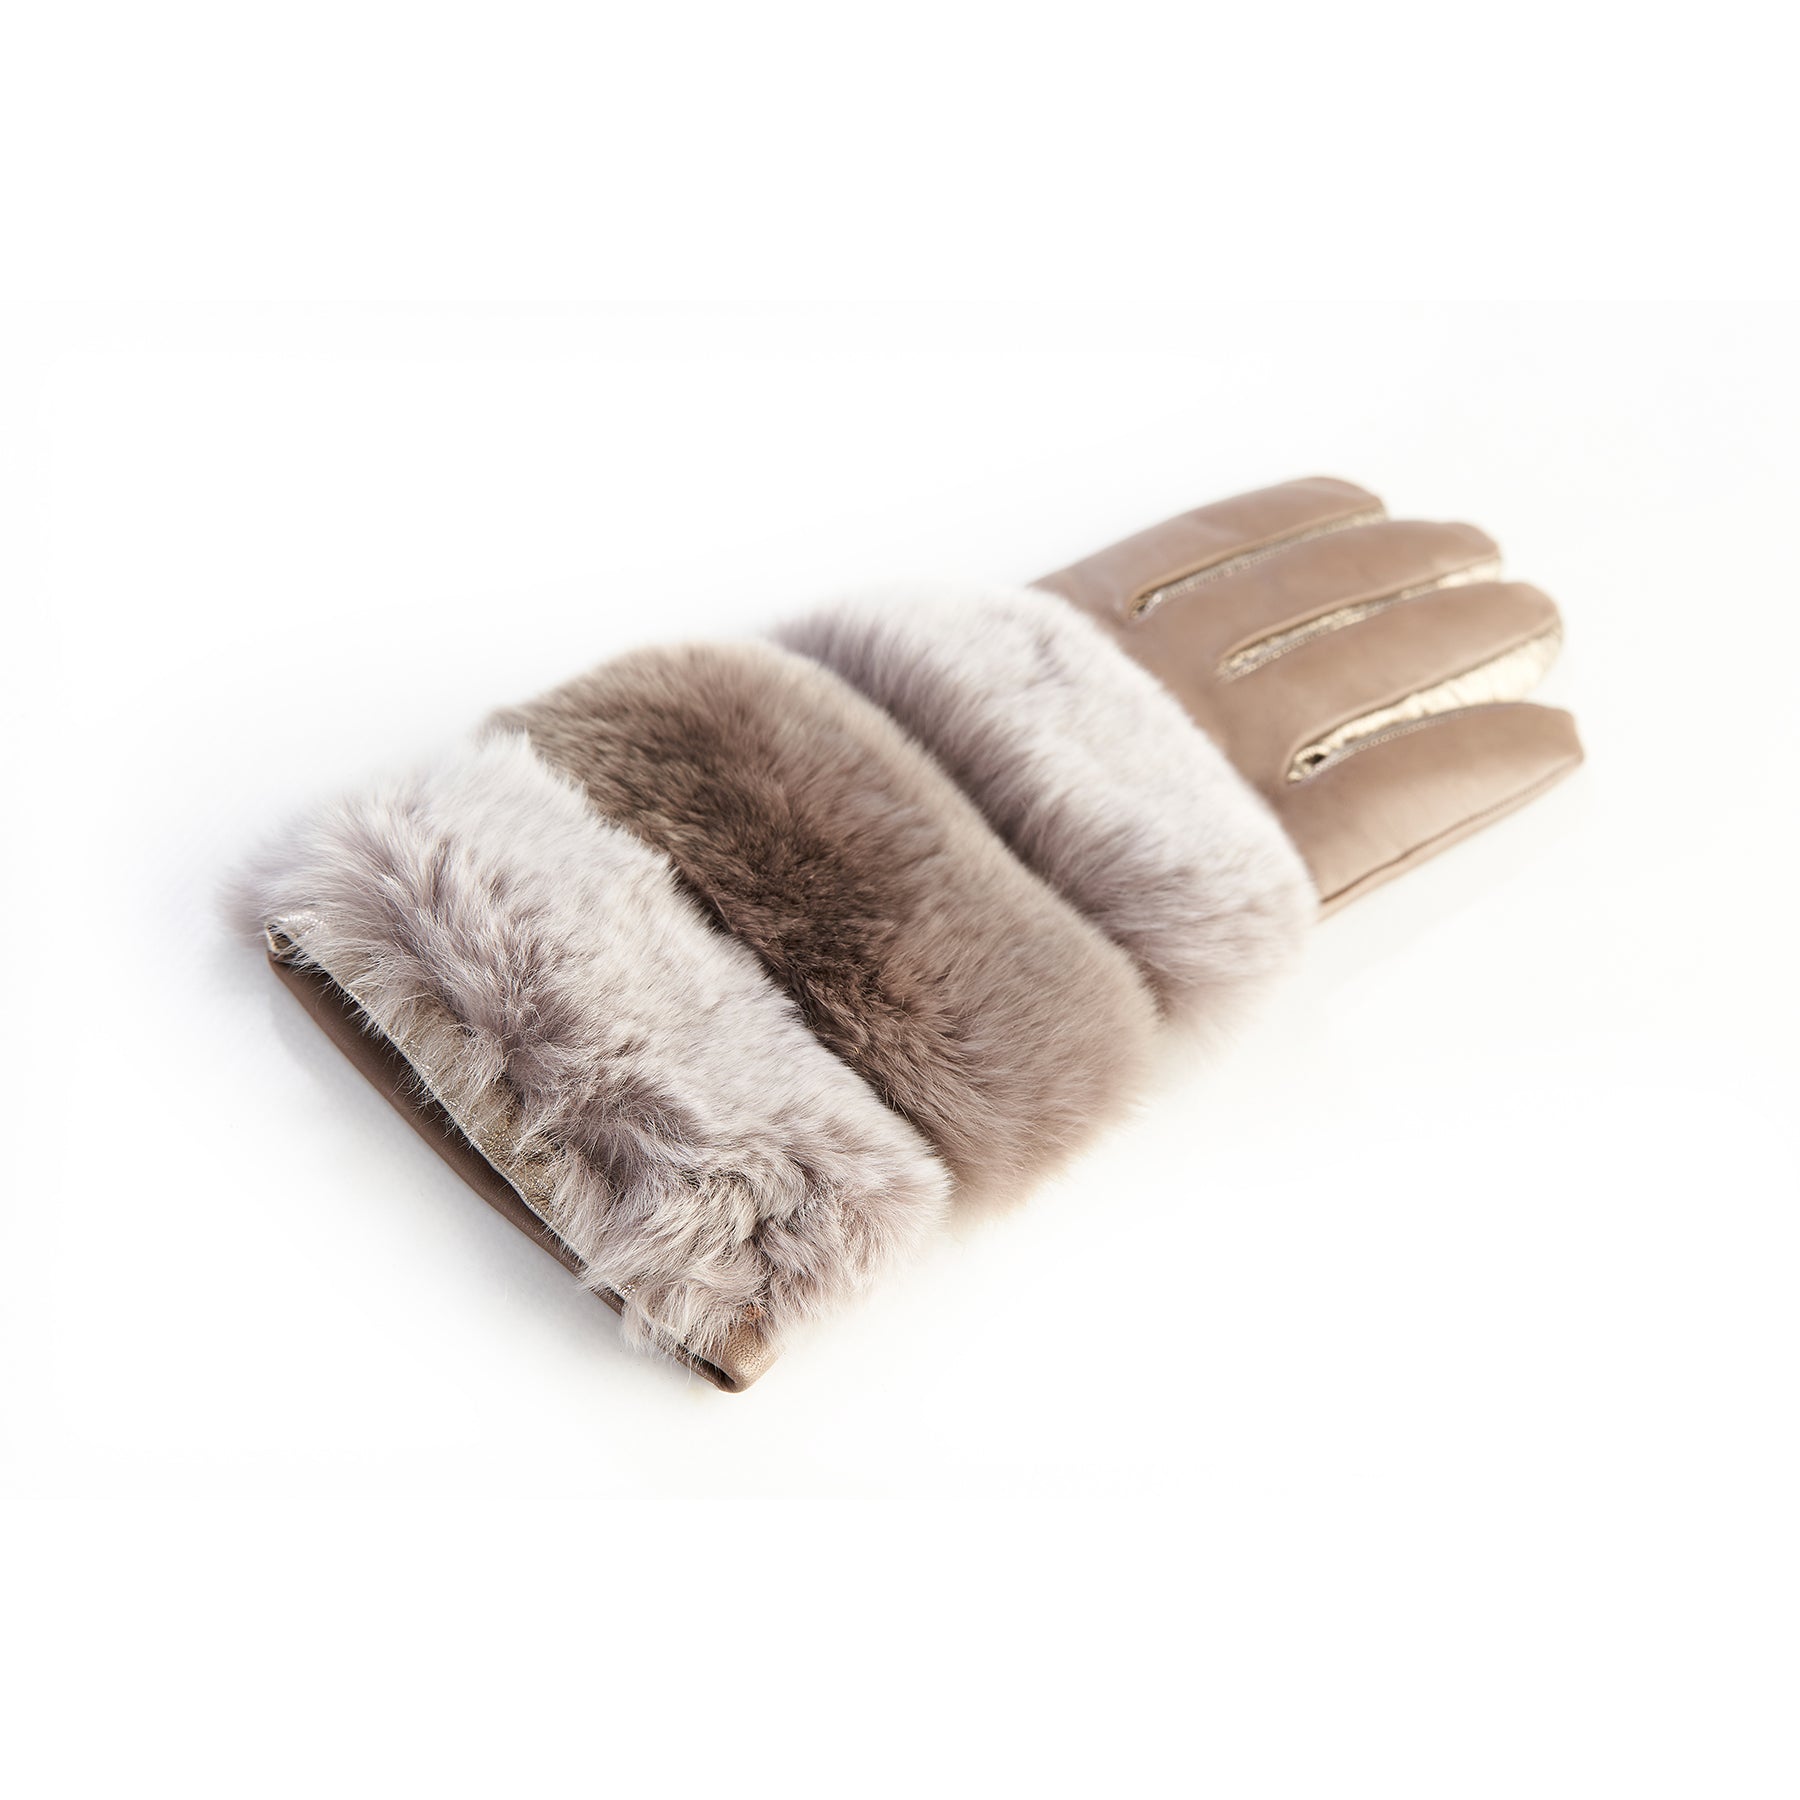 Women's gloves in tortora and gold nappa leather with natural fur